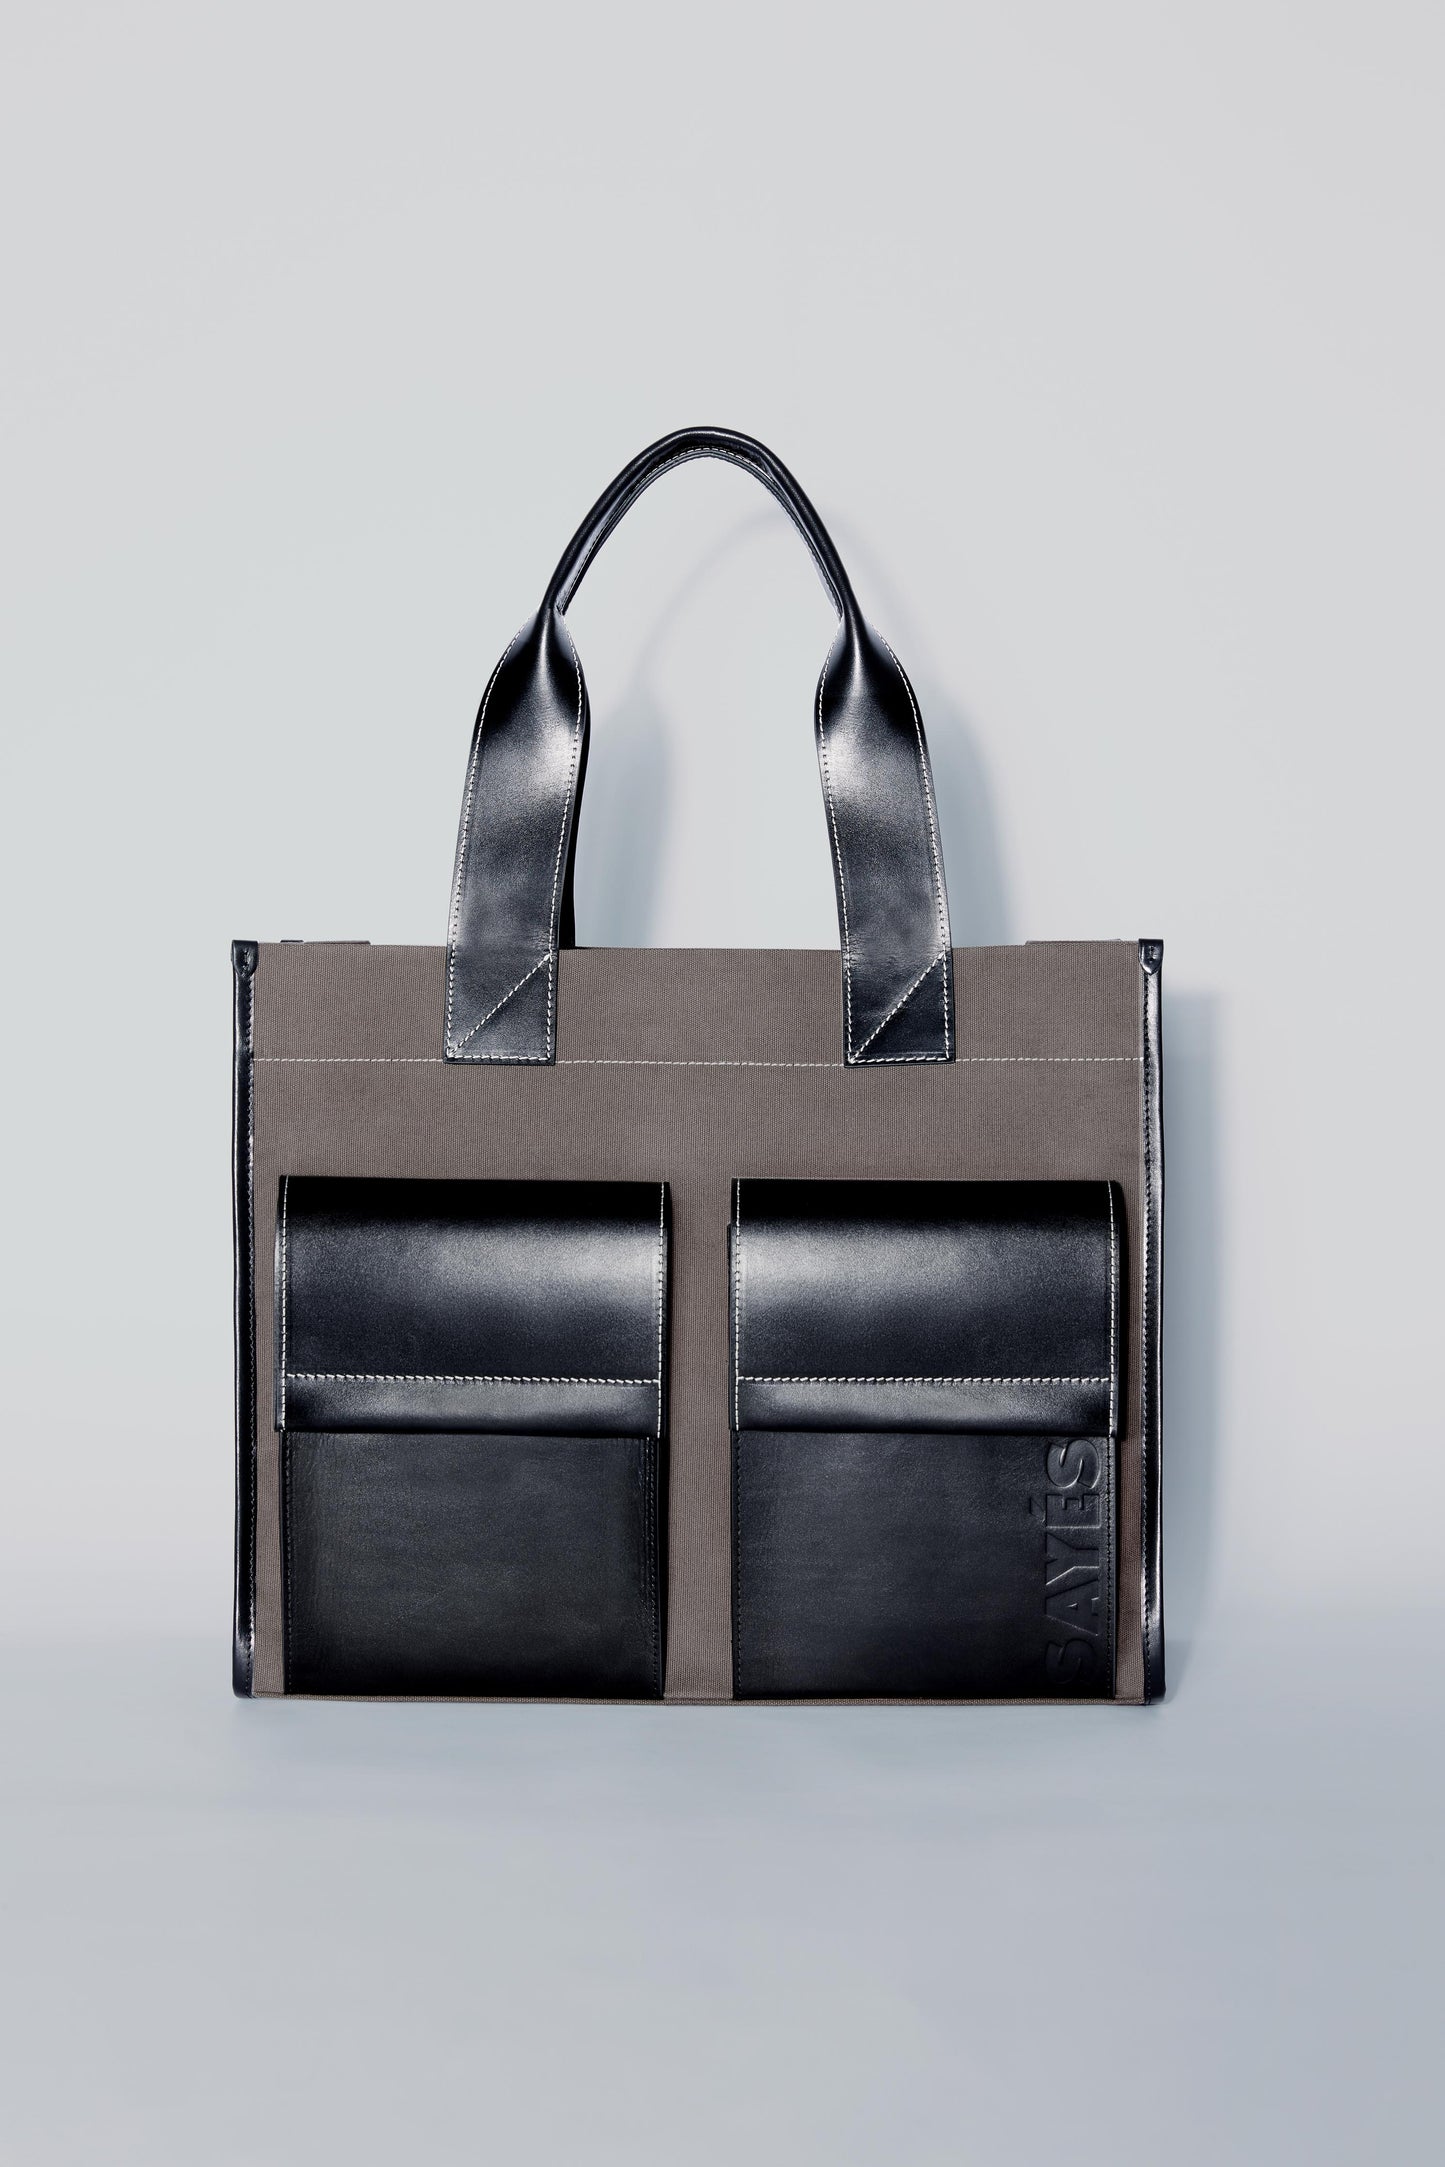 STITCHED POCKET MAXI TOTE BAG IN MINK AND BLACK